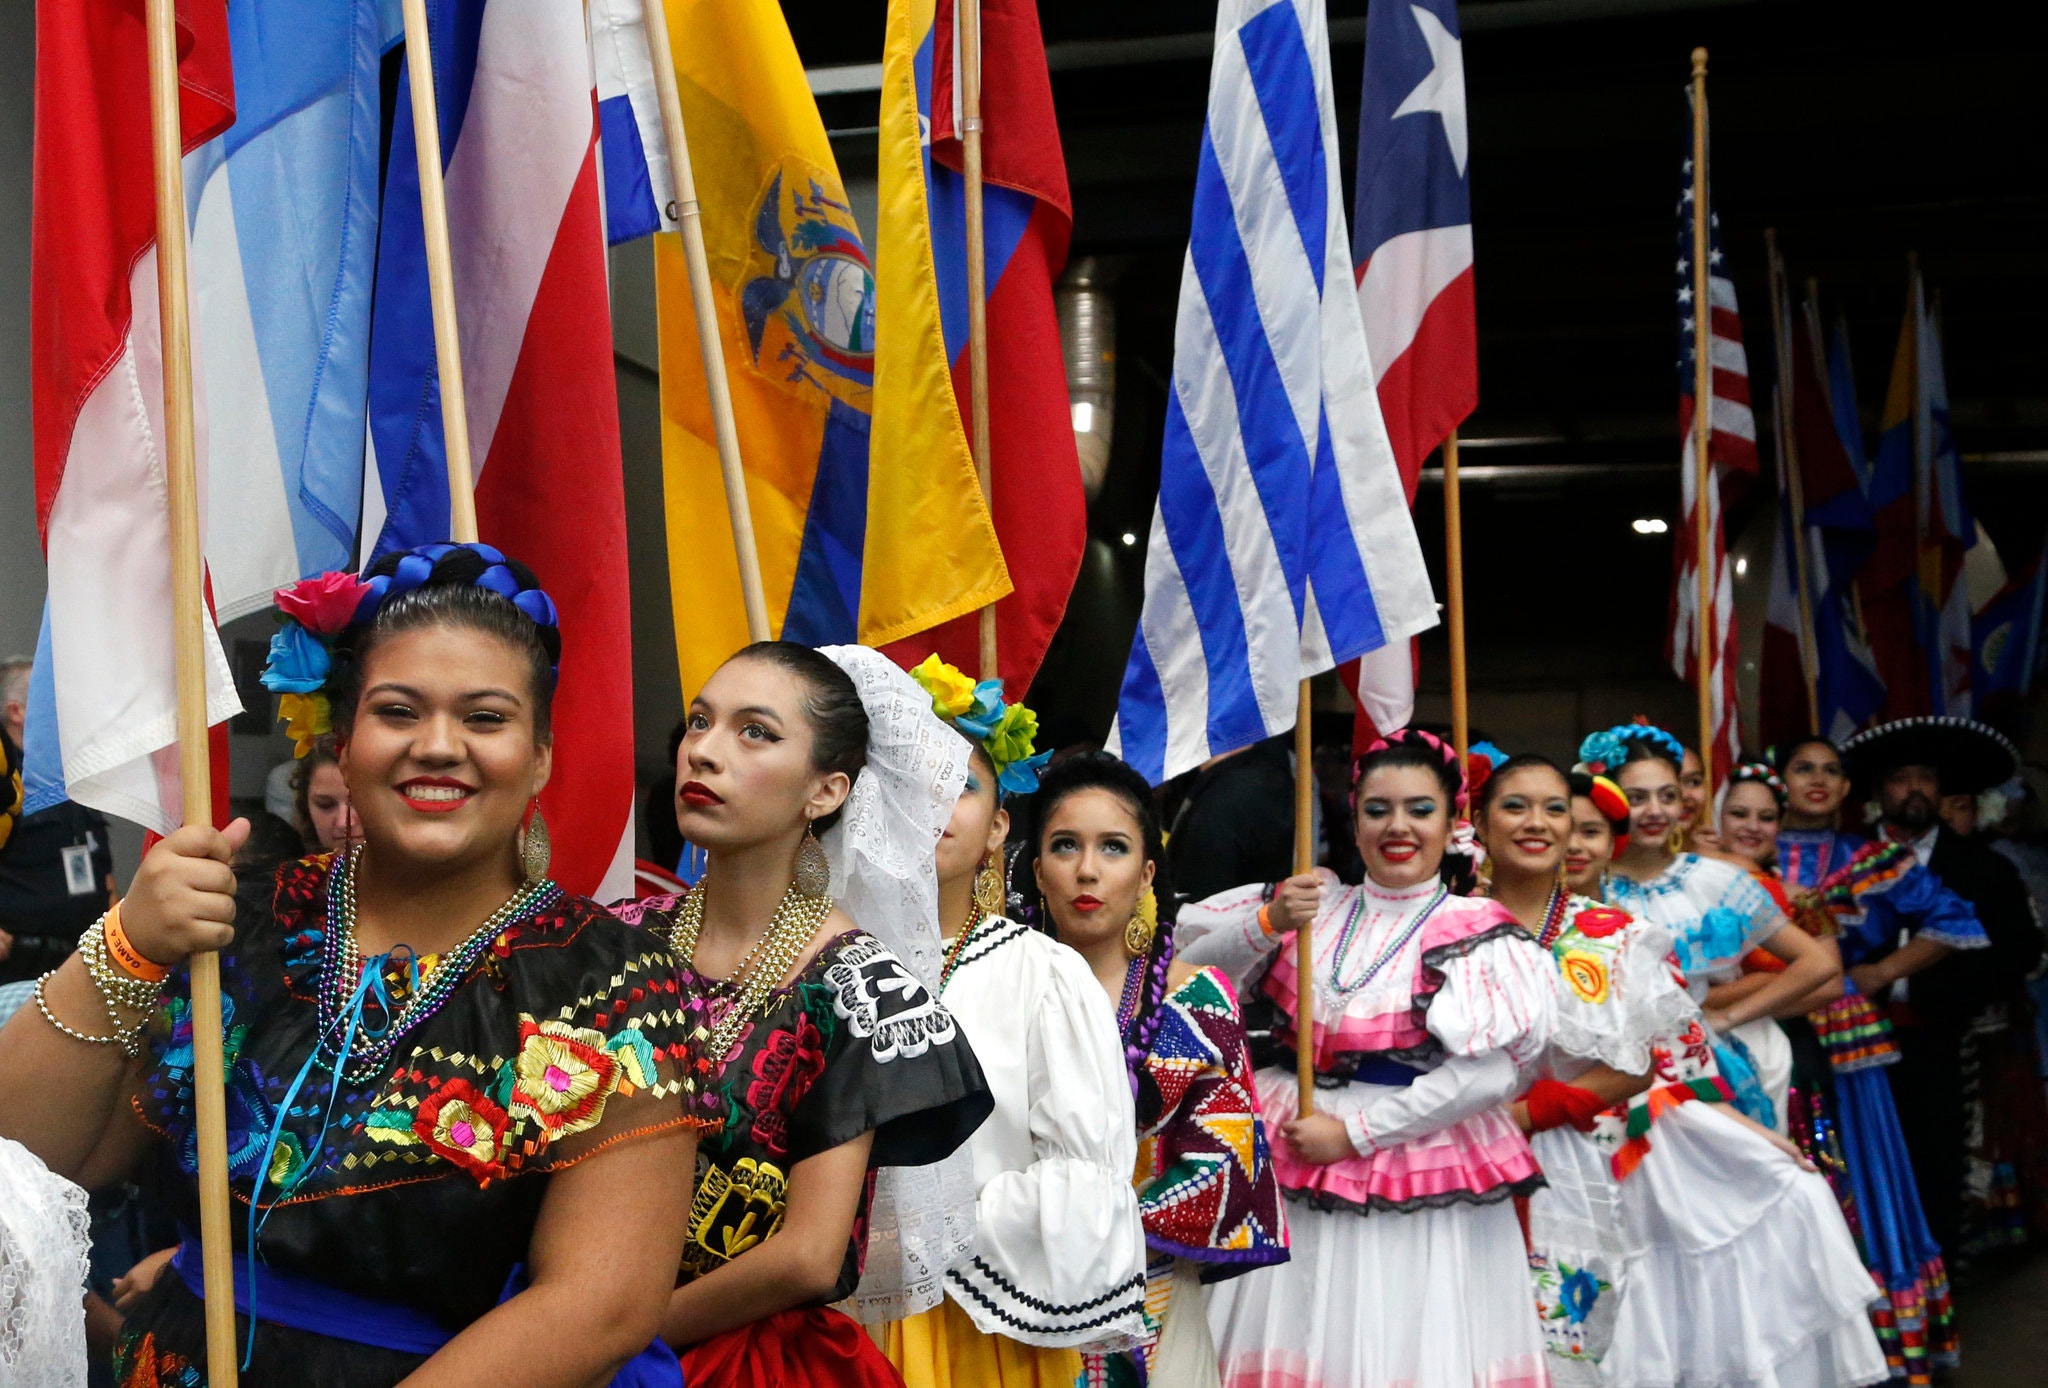 OPINION: Students should educate themselves about Latin American cultures, heritage